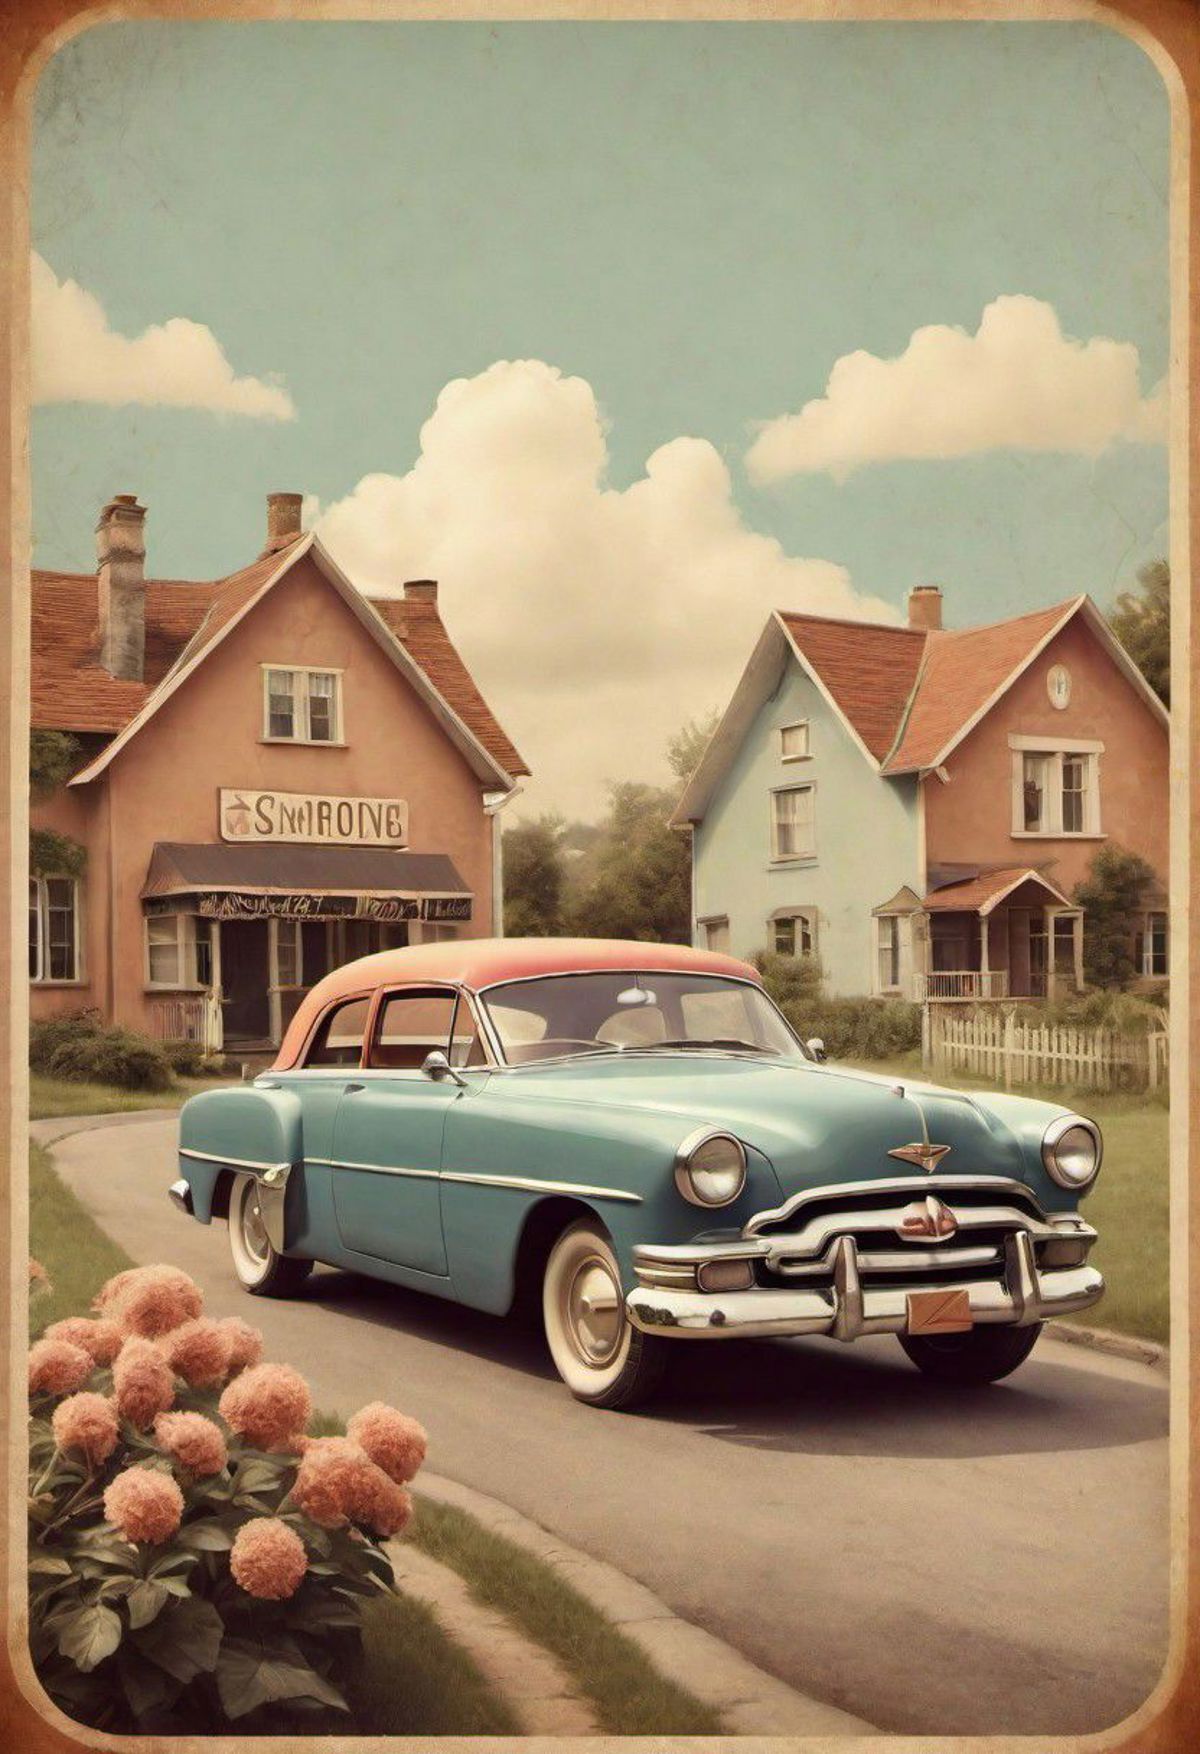 Vintage Painting of a Blue and Pink Car in Front of Houses and a Sign